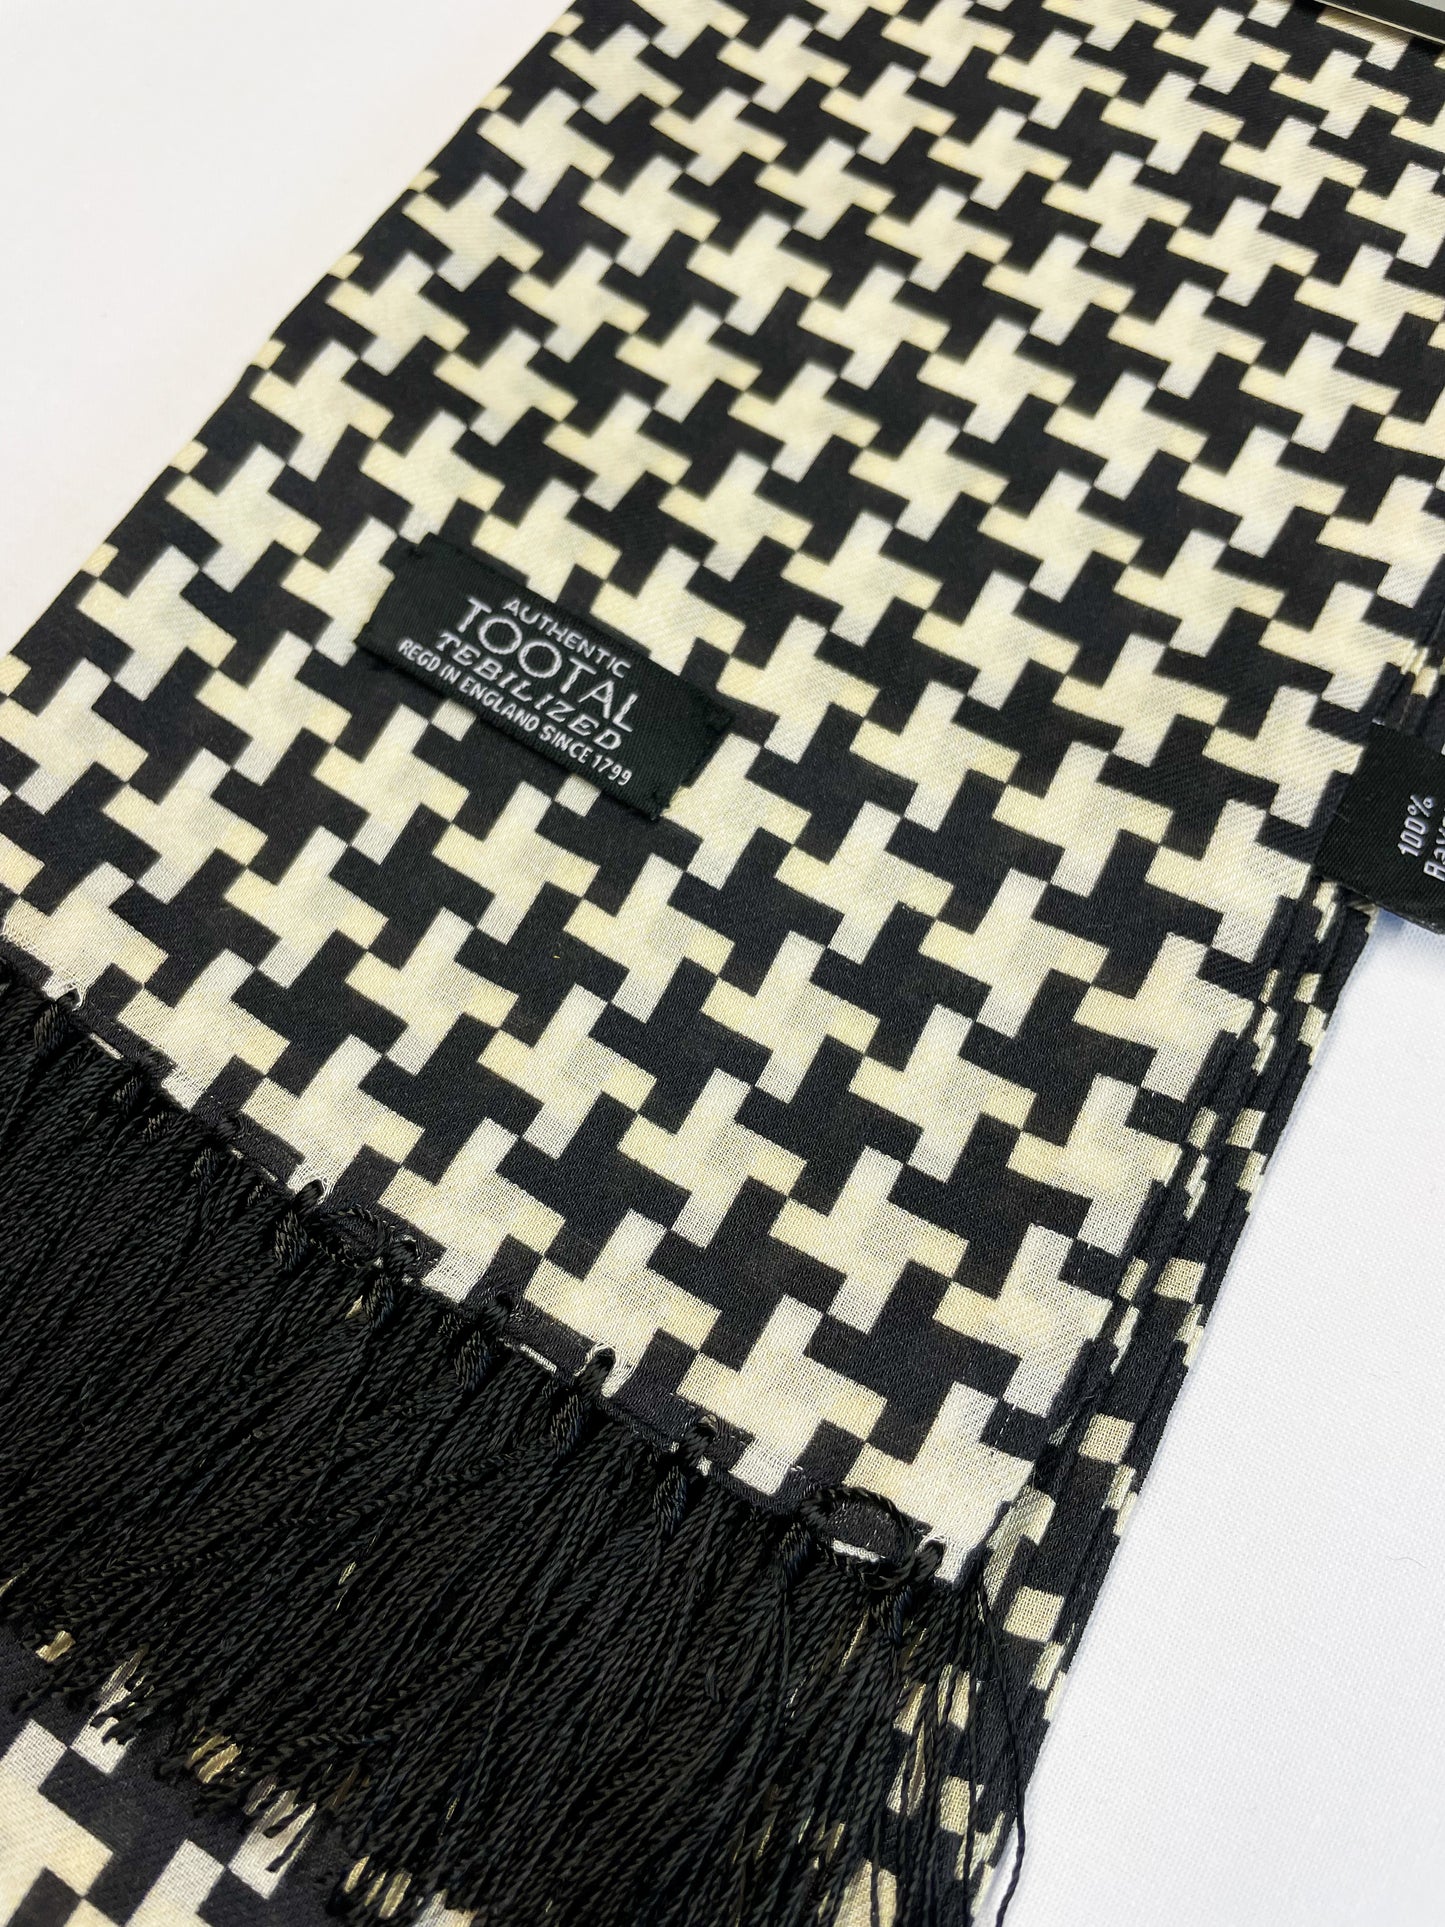 Tootal Archive Inspired Scarves